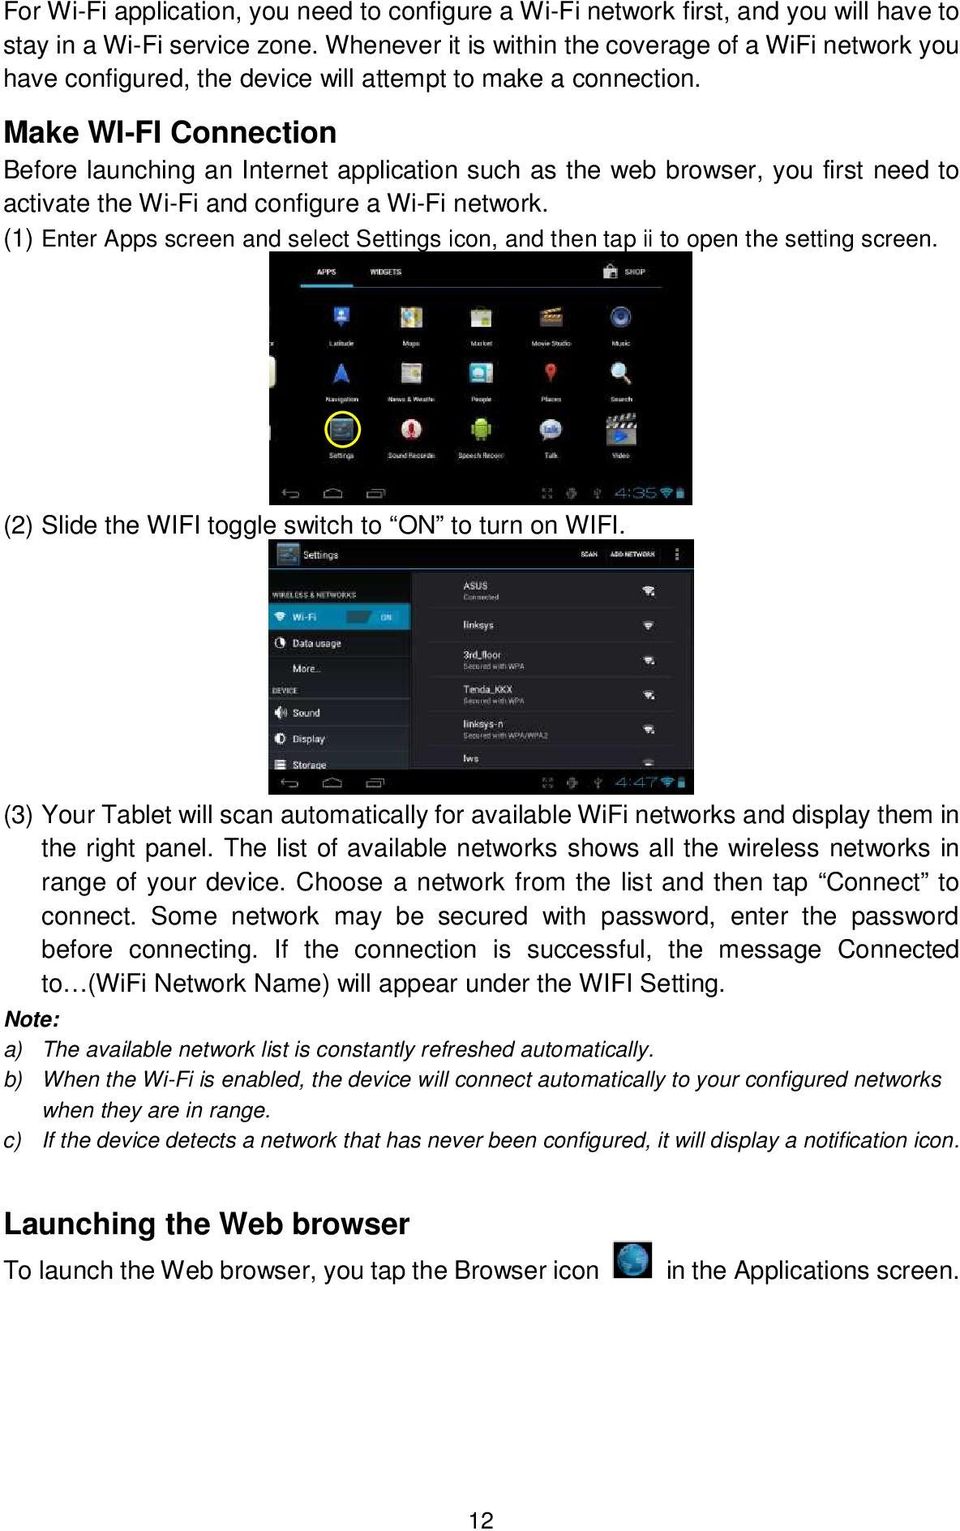 Make WI-FI Connection Before launching an Internet application such as the web browser, you first need to activate the Wi-Fi and configure a Wi-Fi network.